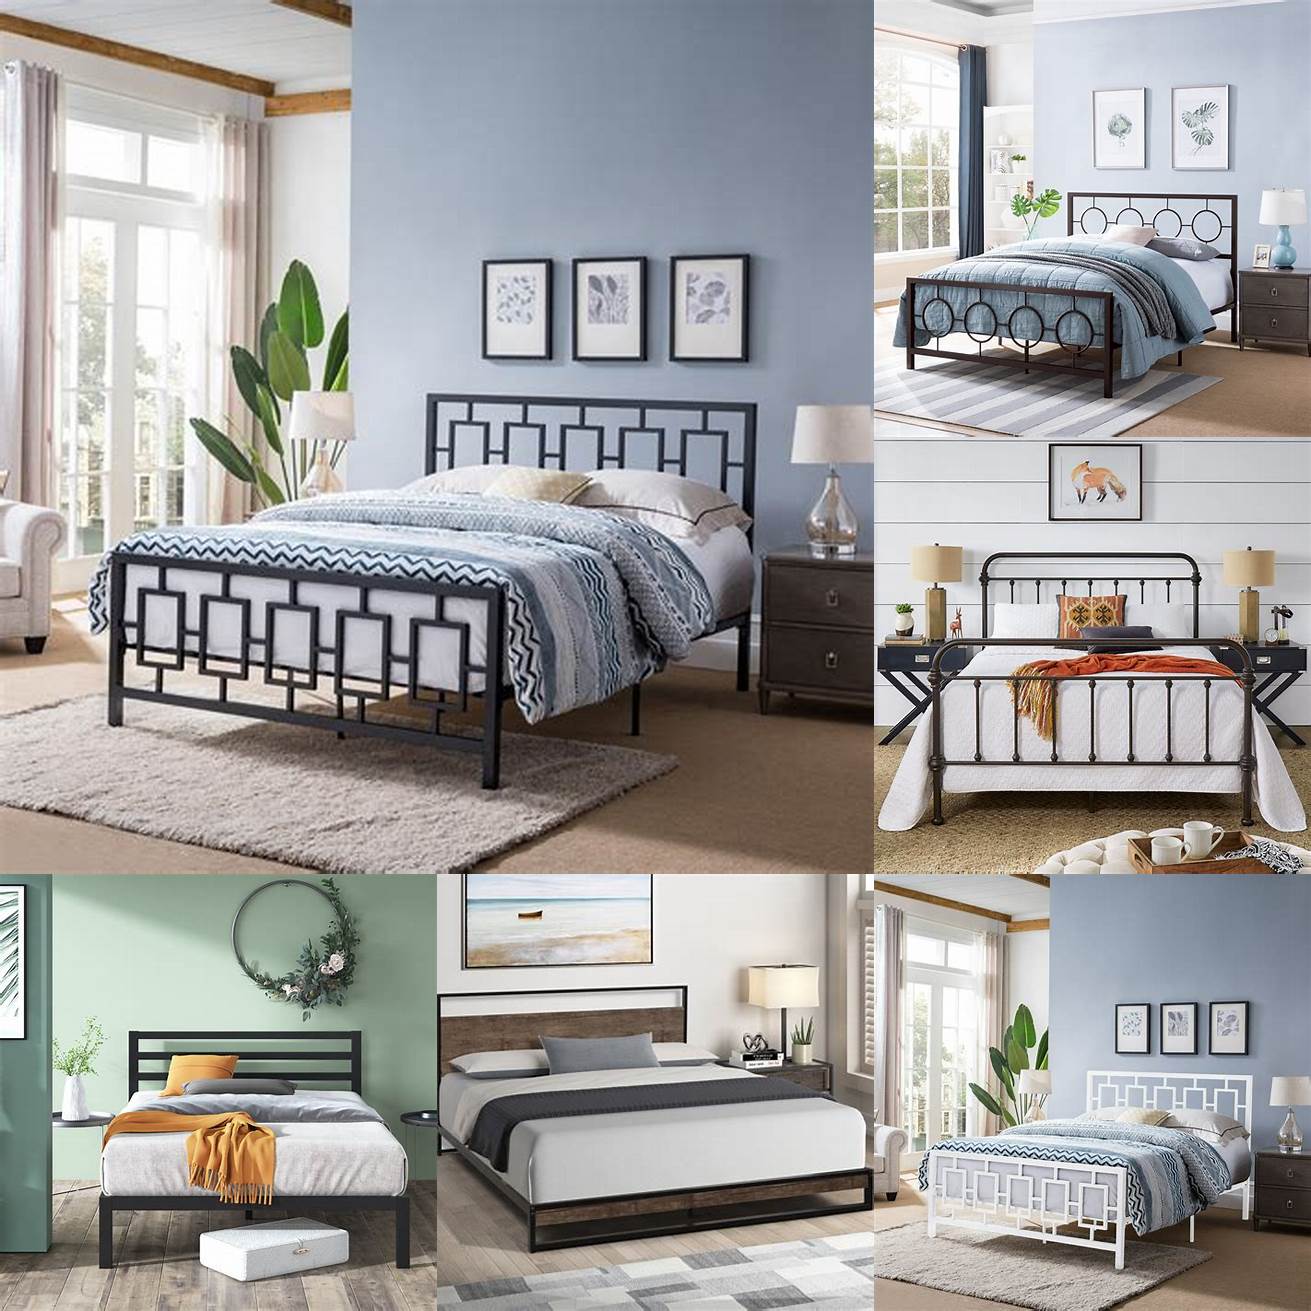 Platform iron bed frame queen with neutral bedding and geometric decor